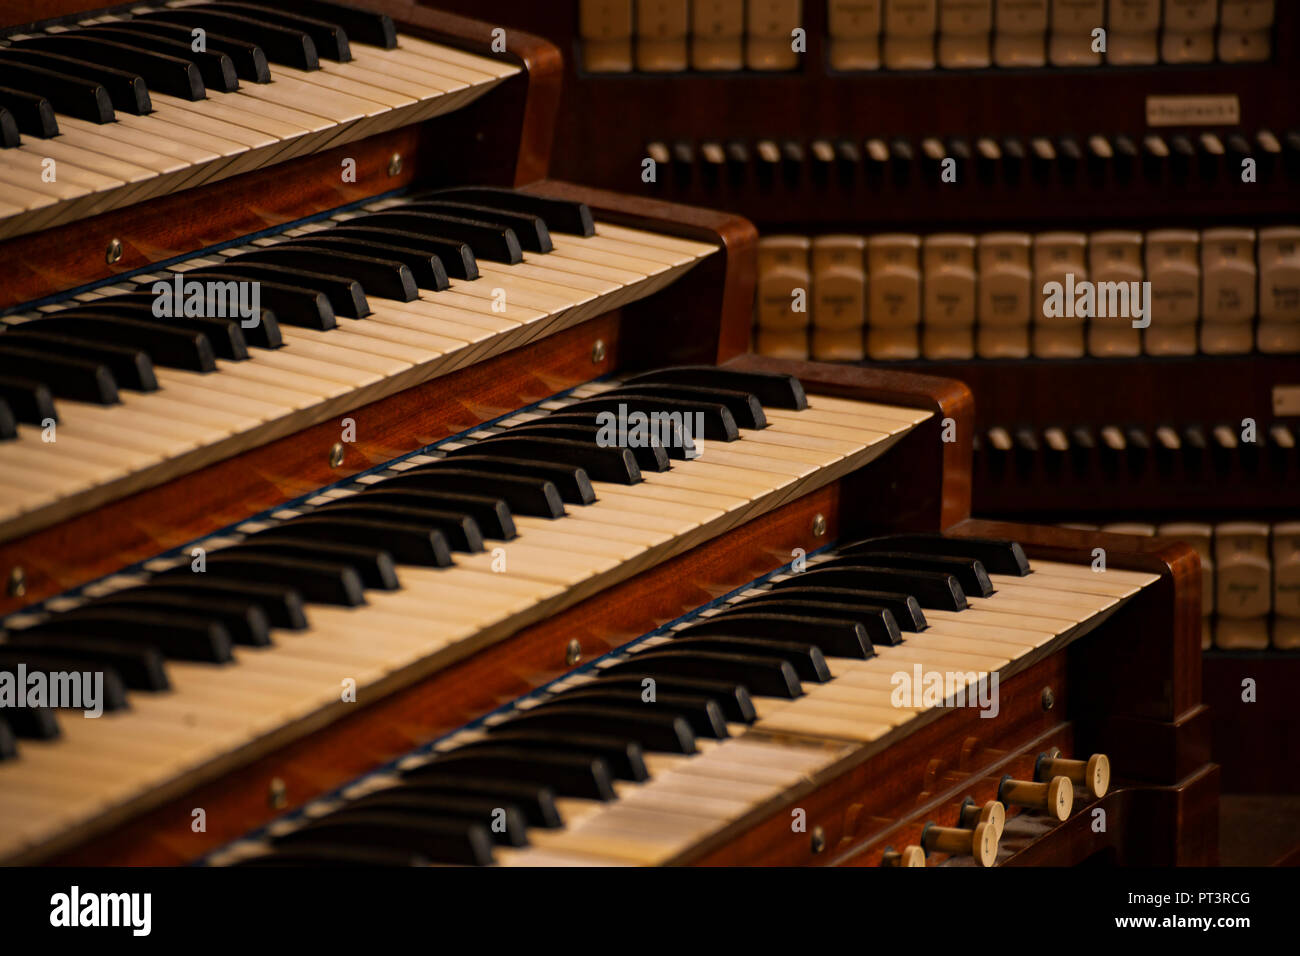 Great Organ with four Manuals Stock Photo